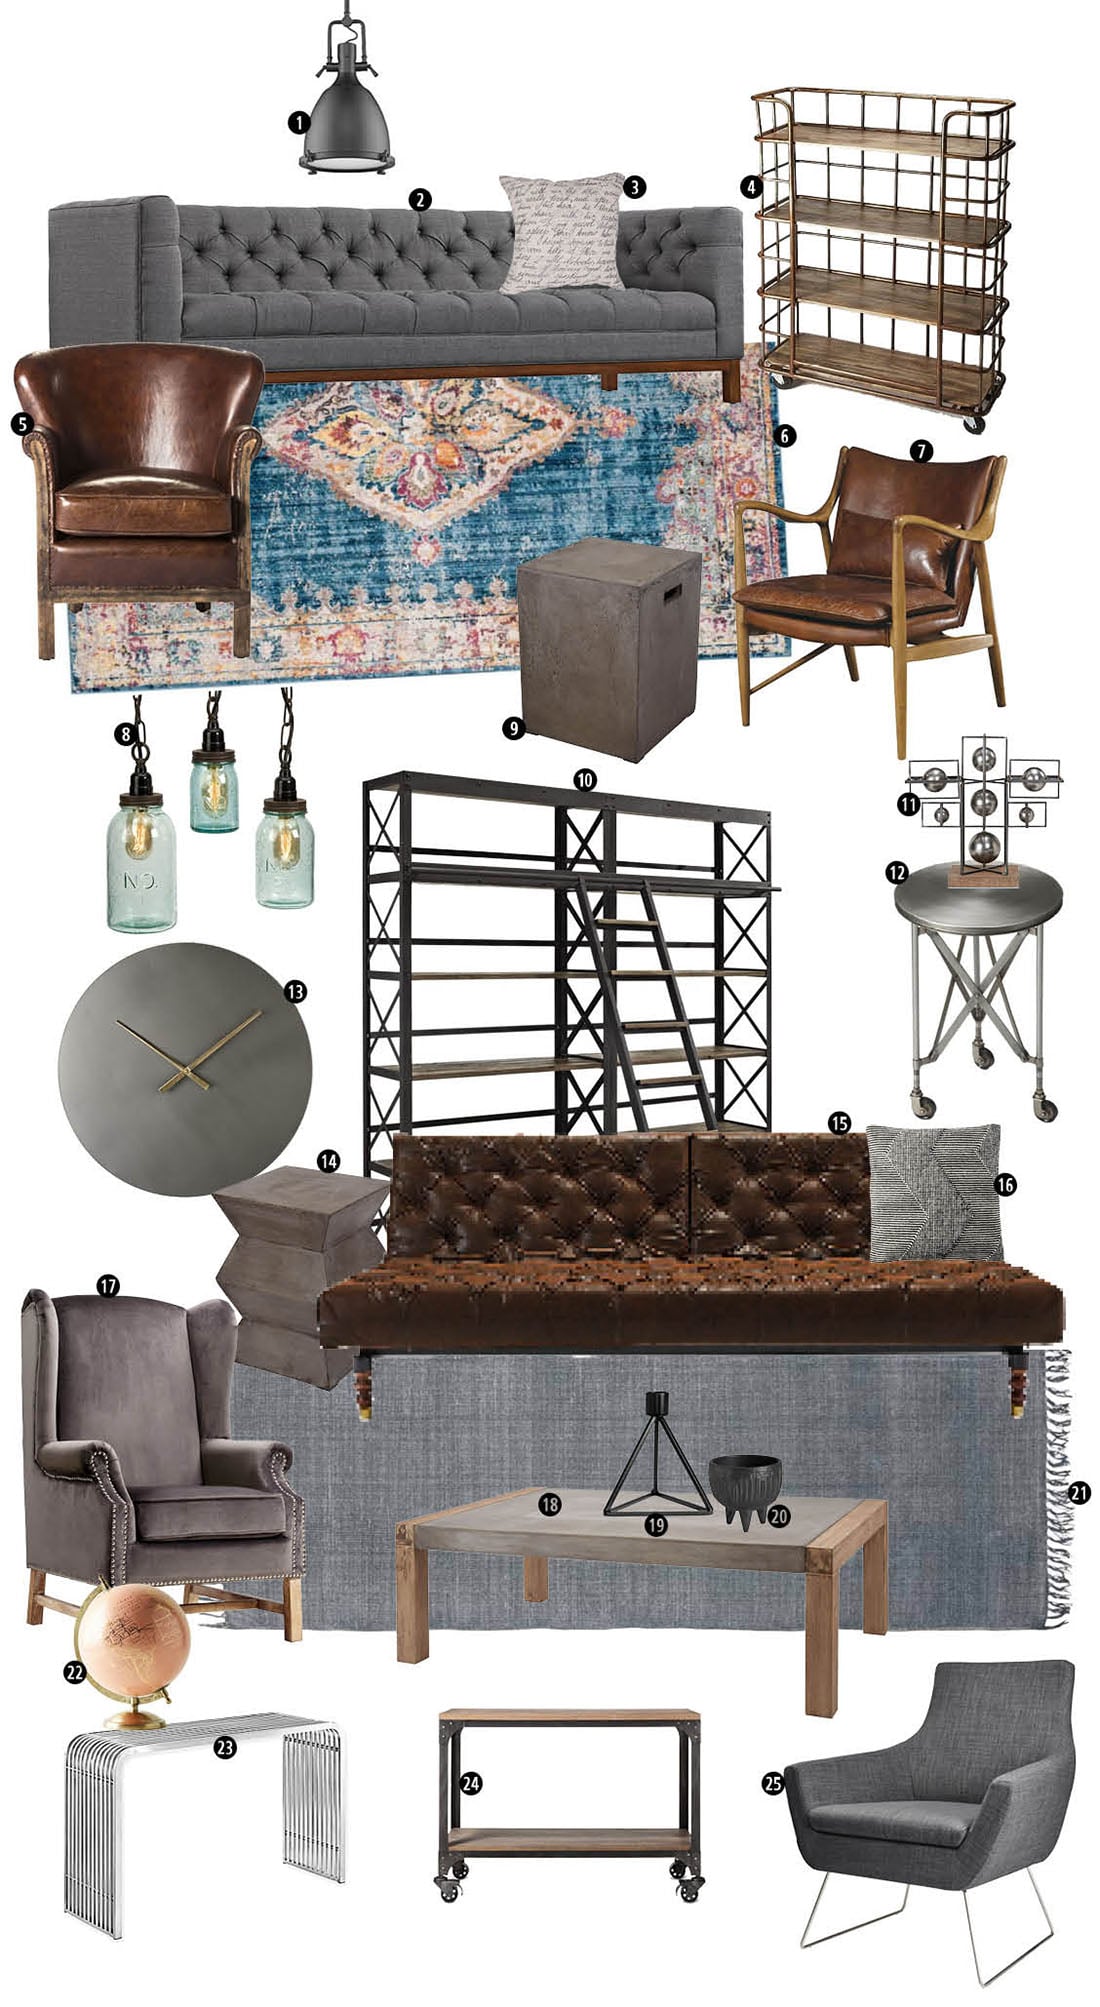 7 Signs Industrial Decor is the Right Home Style for You • Little Gold Pixel • Grab your steampunk novels and see if you mesh with this style.